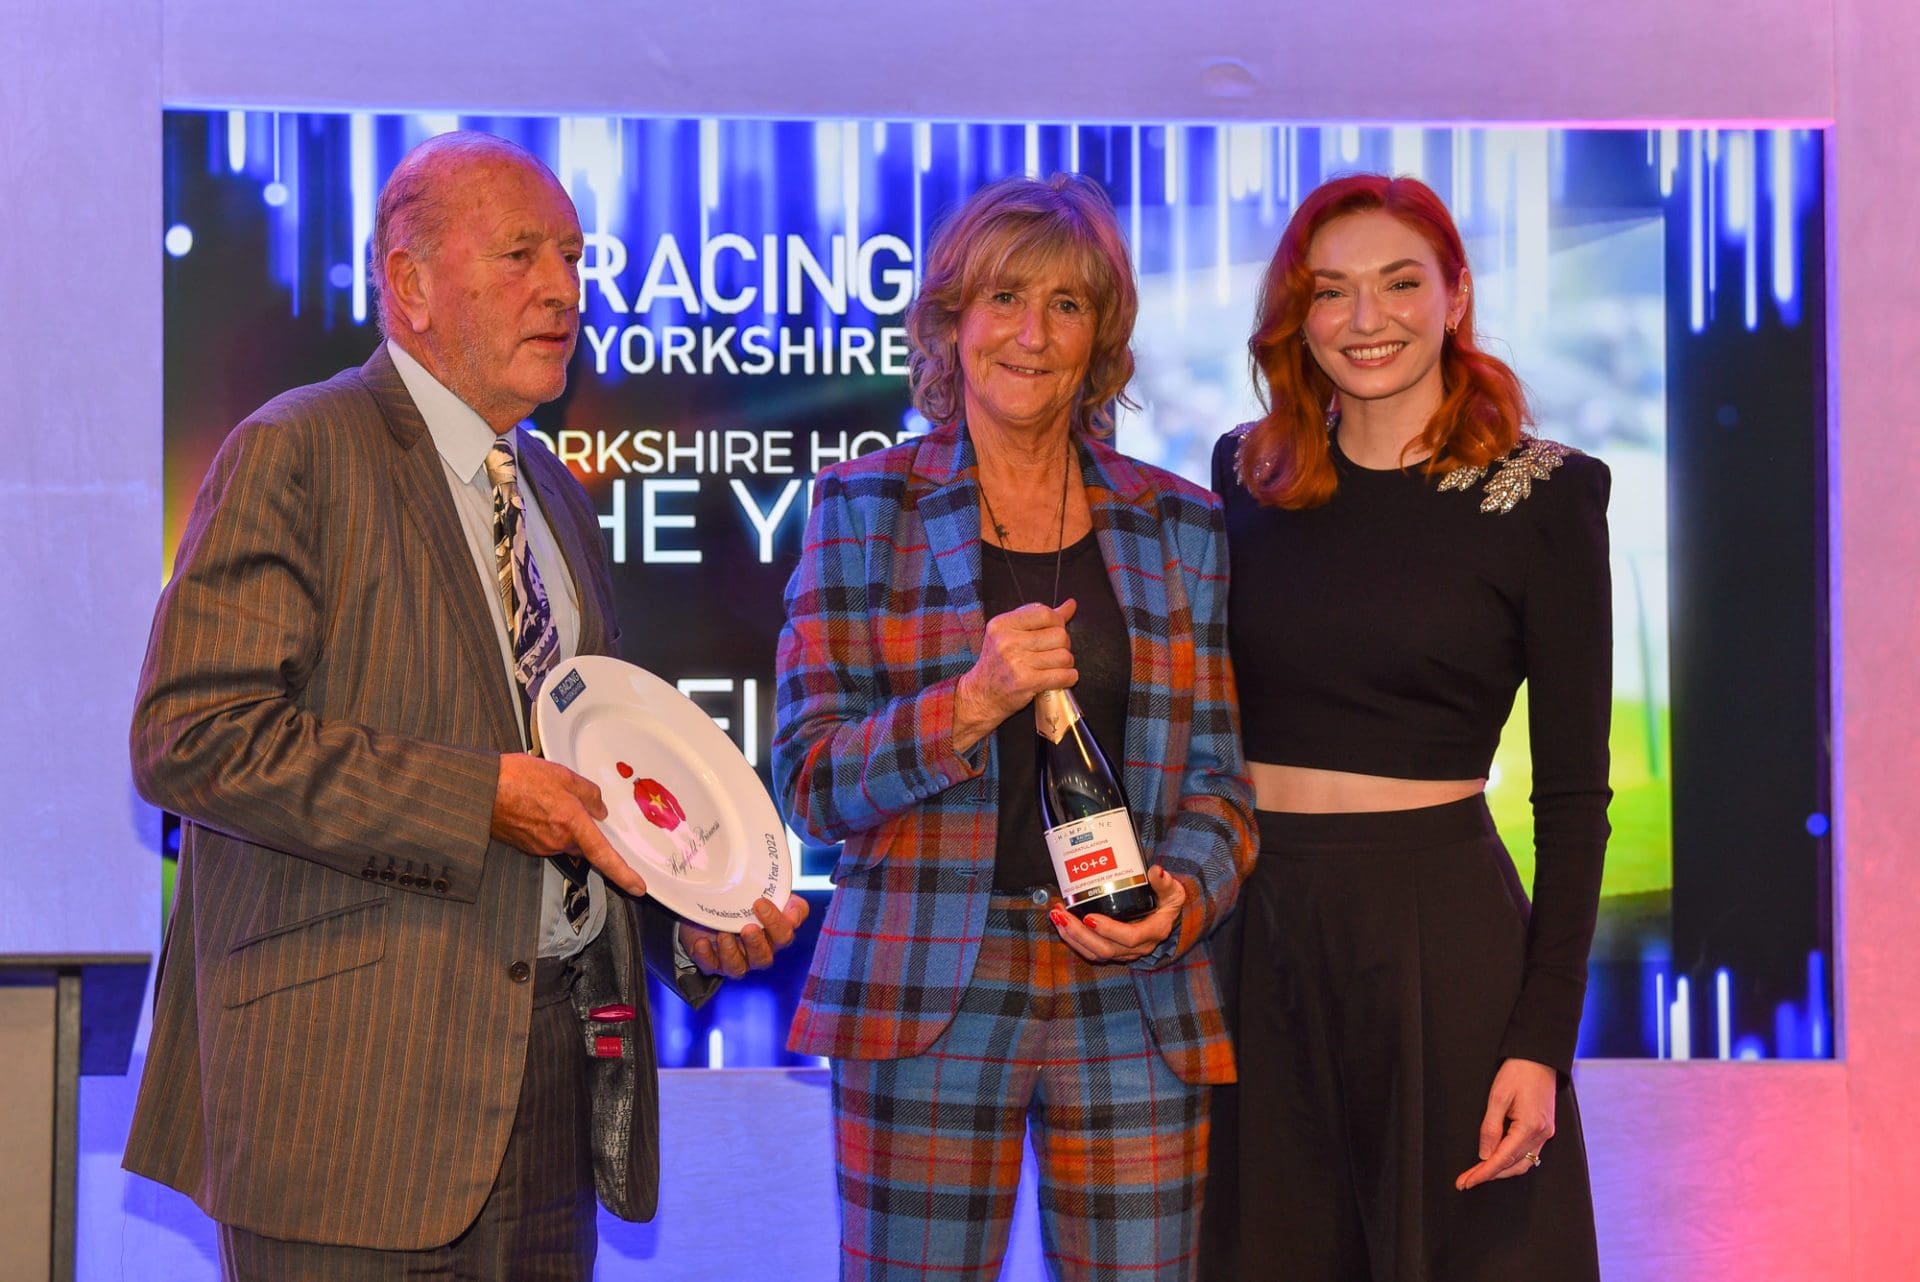 Go Racing In Yorkshire - We're delighted that Luci Hughes, wife of